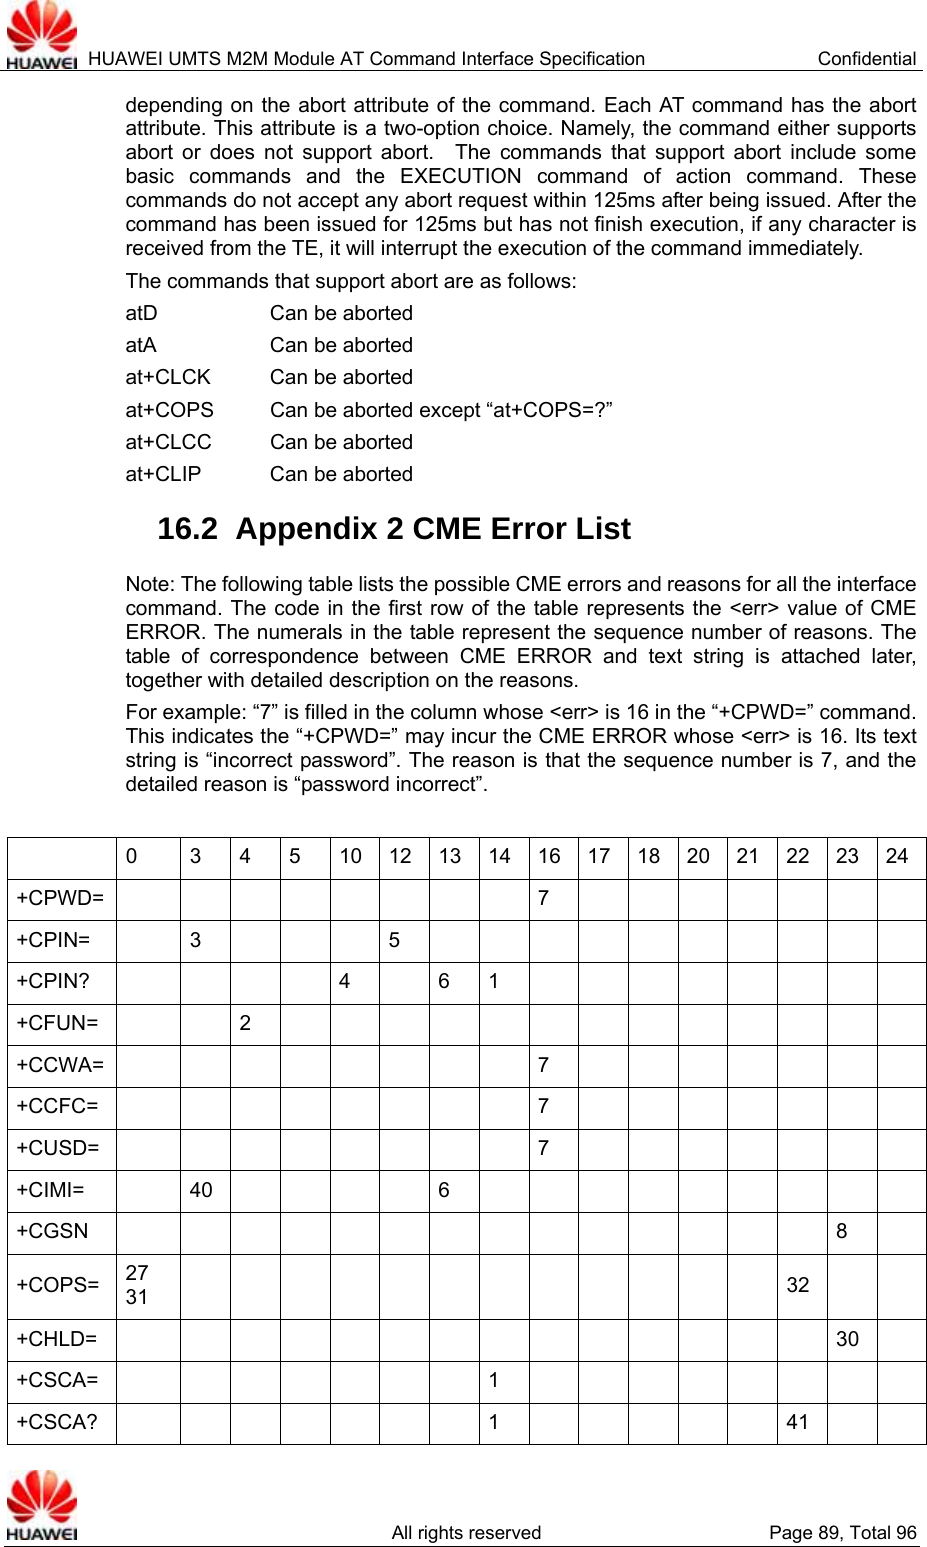  HUAWEI UMTS M2M Module AT Command Interface Specification  Confidential   All rights reserved  Page 89, Total 96 depending on the abort attribute of the command. Each AT command has the abort attribute. This attribute is a two-option choice. Namely, the command either supports abort or does not support abort.  The commands that support abort include some basic commands and the EXECUTION command of action command. These commands do not accept any abort request within 125ms after being issued. After the command has been issued for 125ms but has not finish execution, if any character is received from the TE, it will interrupt the execution of the command immediately.   The commands that support abort are as follows:     atD   Can be aborted  atA   Can be aborted  at+CLCK    Can be aborted   at+COPS    Can be aborted except “at+COPS=?” at+CLCC    Can be aborted   at+CLIP    Can be aborted   16.2  Appendix 2 CME Error List   Note: The following table lists the possible CME errors and reasons for all the interface command. The code in the first row of the table represents the &lt;err&gt; value of CME ERROR. The numerals in the table represent the sequence number of reasons. The table of correspondence between CME ERROR and text string is attached later, together with detailed description on the reasons.   For example: “7” is filled in the column whose &lt;err&gt; is 16 in the “+CPWD=” command. This indicates the “+CPWD=” may incur the CME ERROR whose &lt;err&gt; is 16. Its text string is “incorrect password”. The reason is that the sequence number is 7, and the detailed reason is “password incorrect”.     0 3 4 5 10 12 13 14 16 17 18 20 21 22 23 24+CPWD=          7        +CPIN=   3    5           +CPIN?      4  6 1         +CFUN=    2              +CCWA=          7        +CCFC=          7        +CUSD=          7        +CIMI=   40    6          +CGSN                8  +COPS=  27 31              32   +CHLD=                30  +CSCA=         1         +CSCA?         1      41   